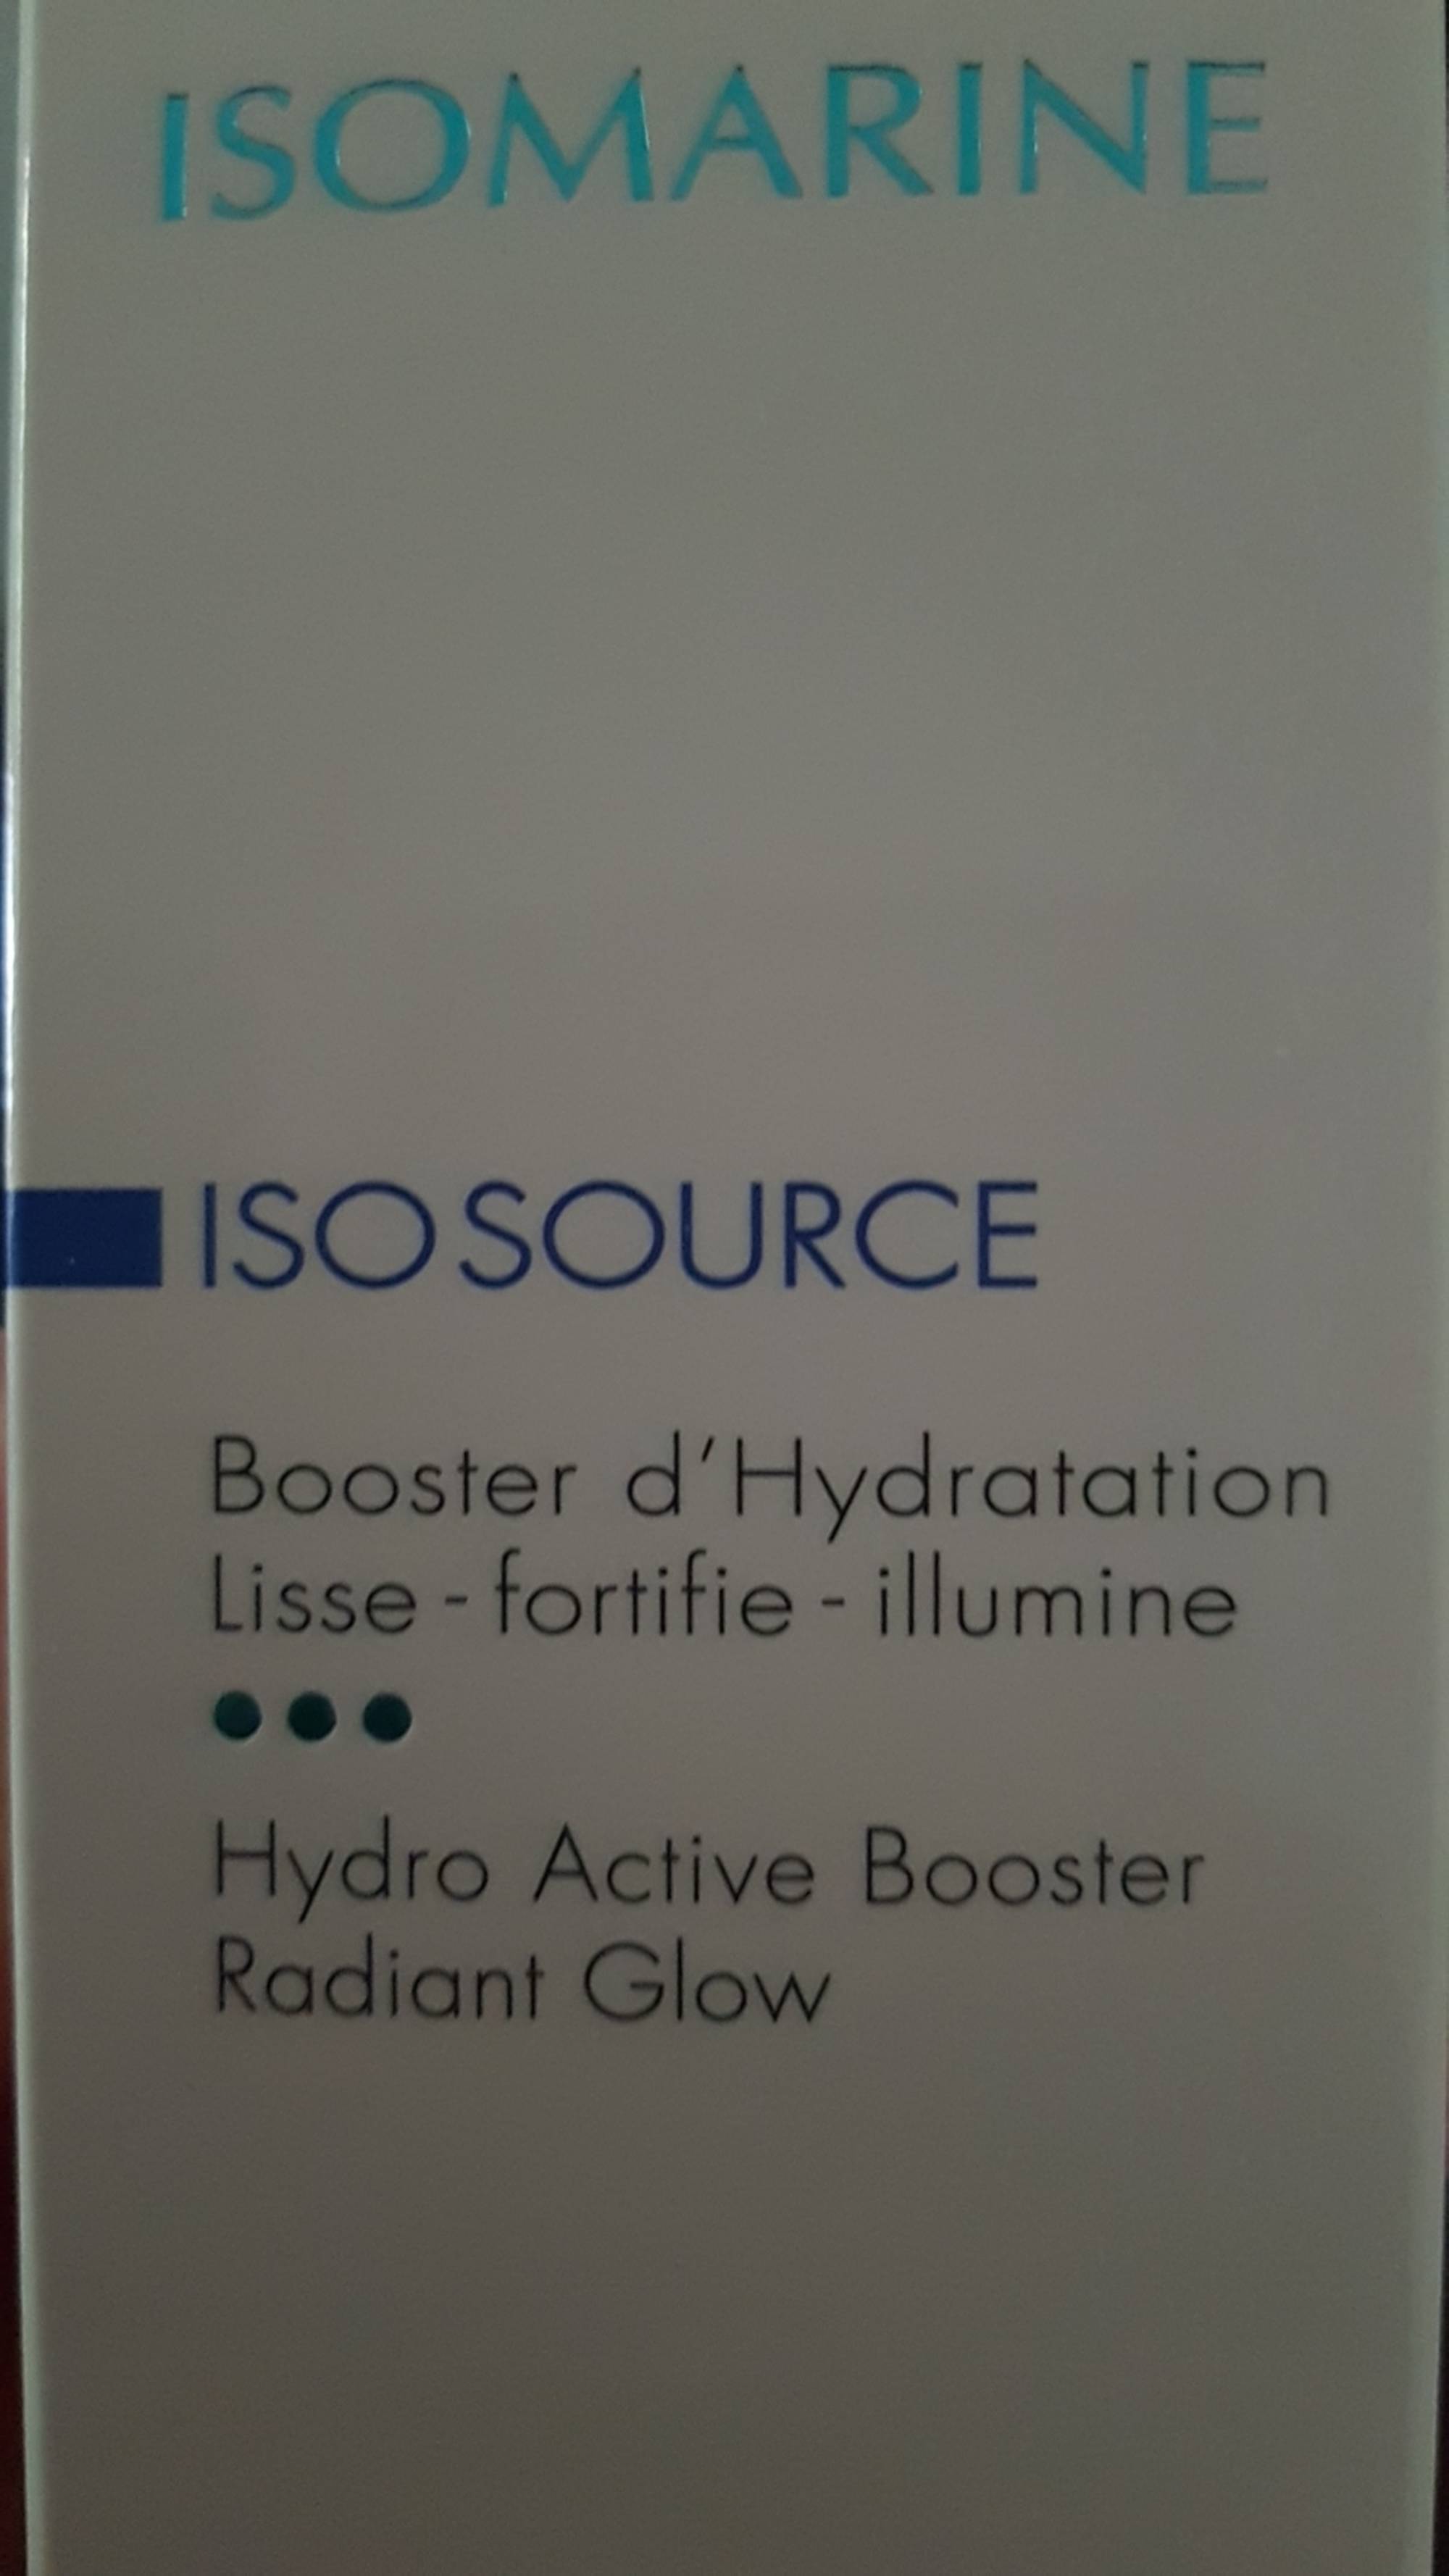 ISOMARINE - Iso source - Booster d'hydratation 